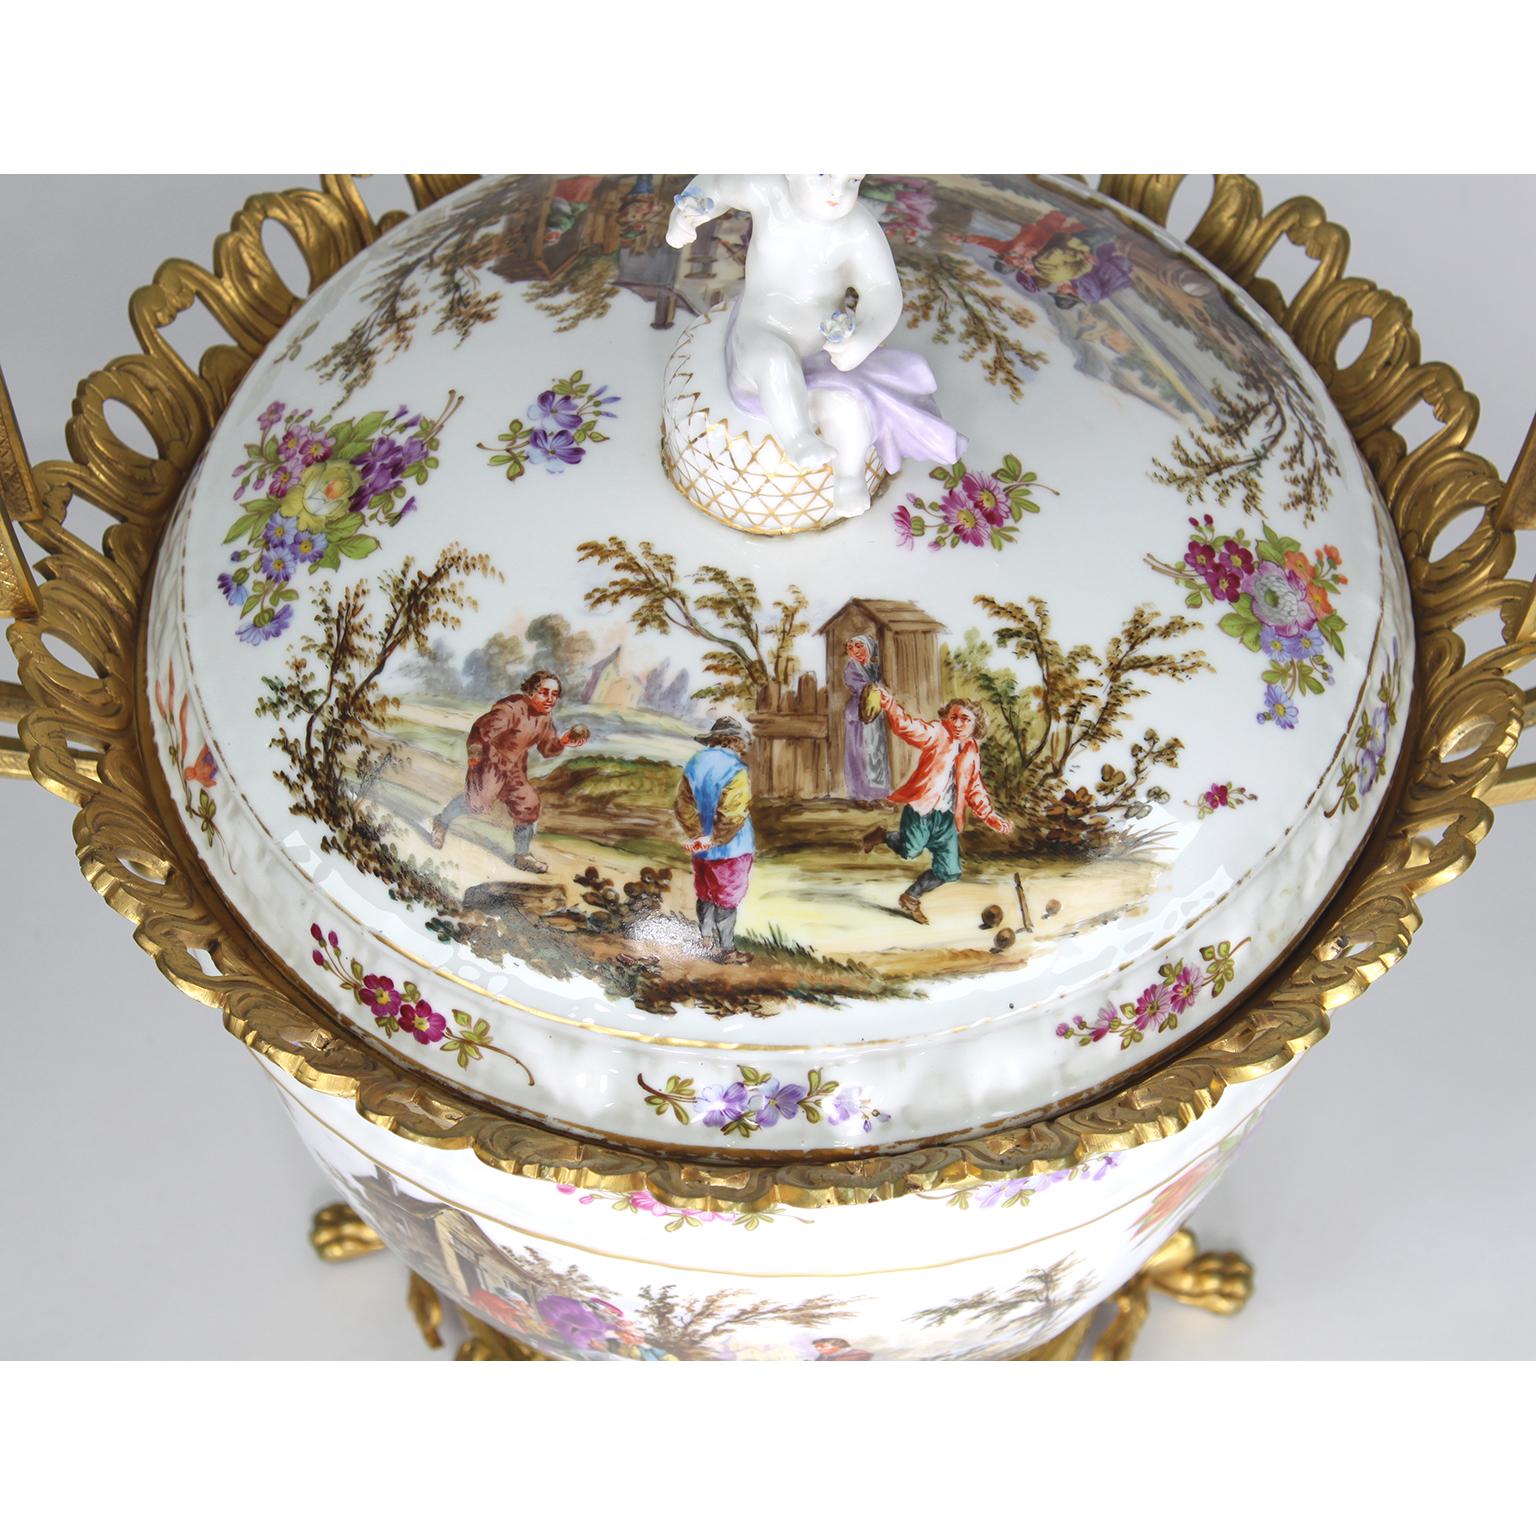 Large German Porcelain & Gilt-Bronze Mounted Urn with Cover in Manner of Meissen For Sale 8